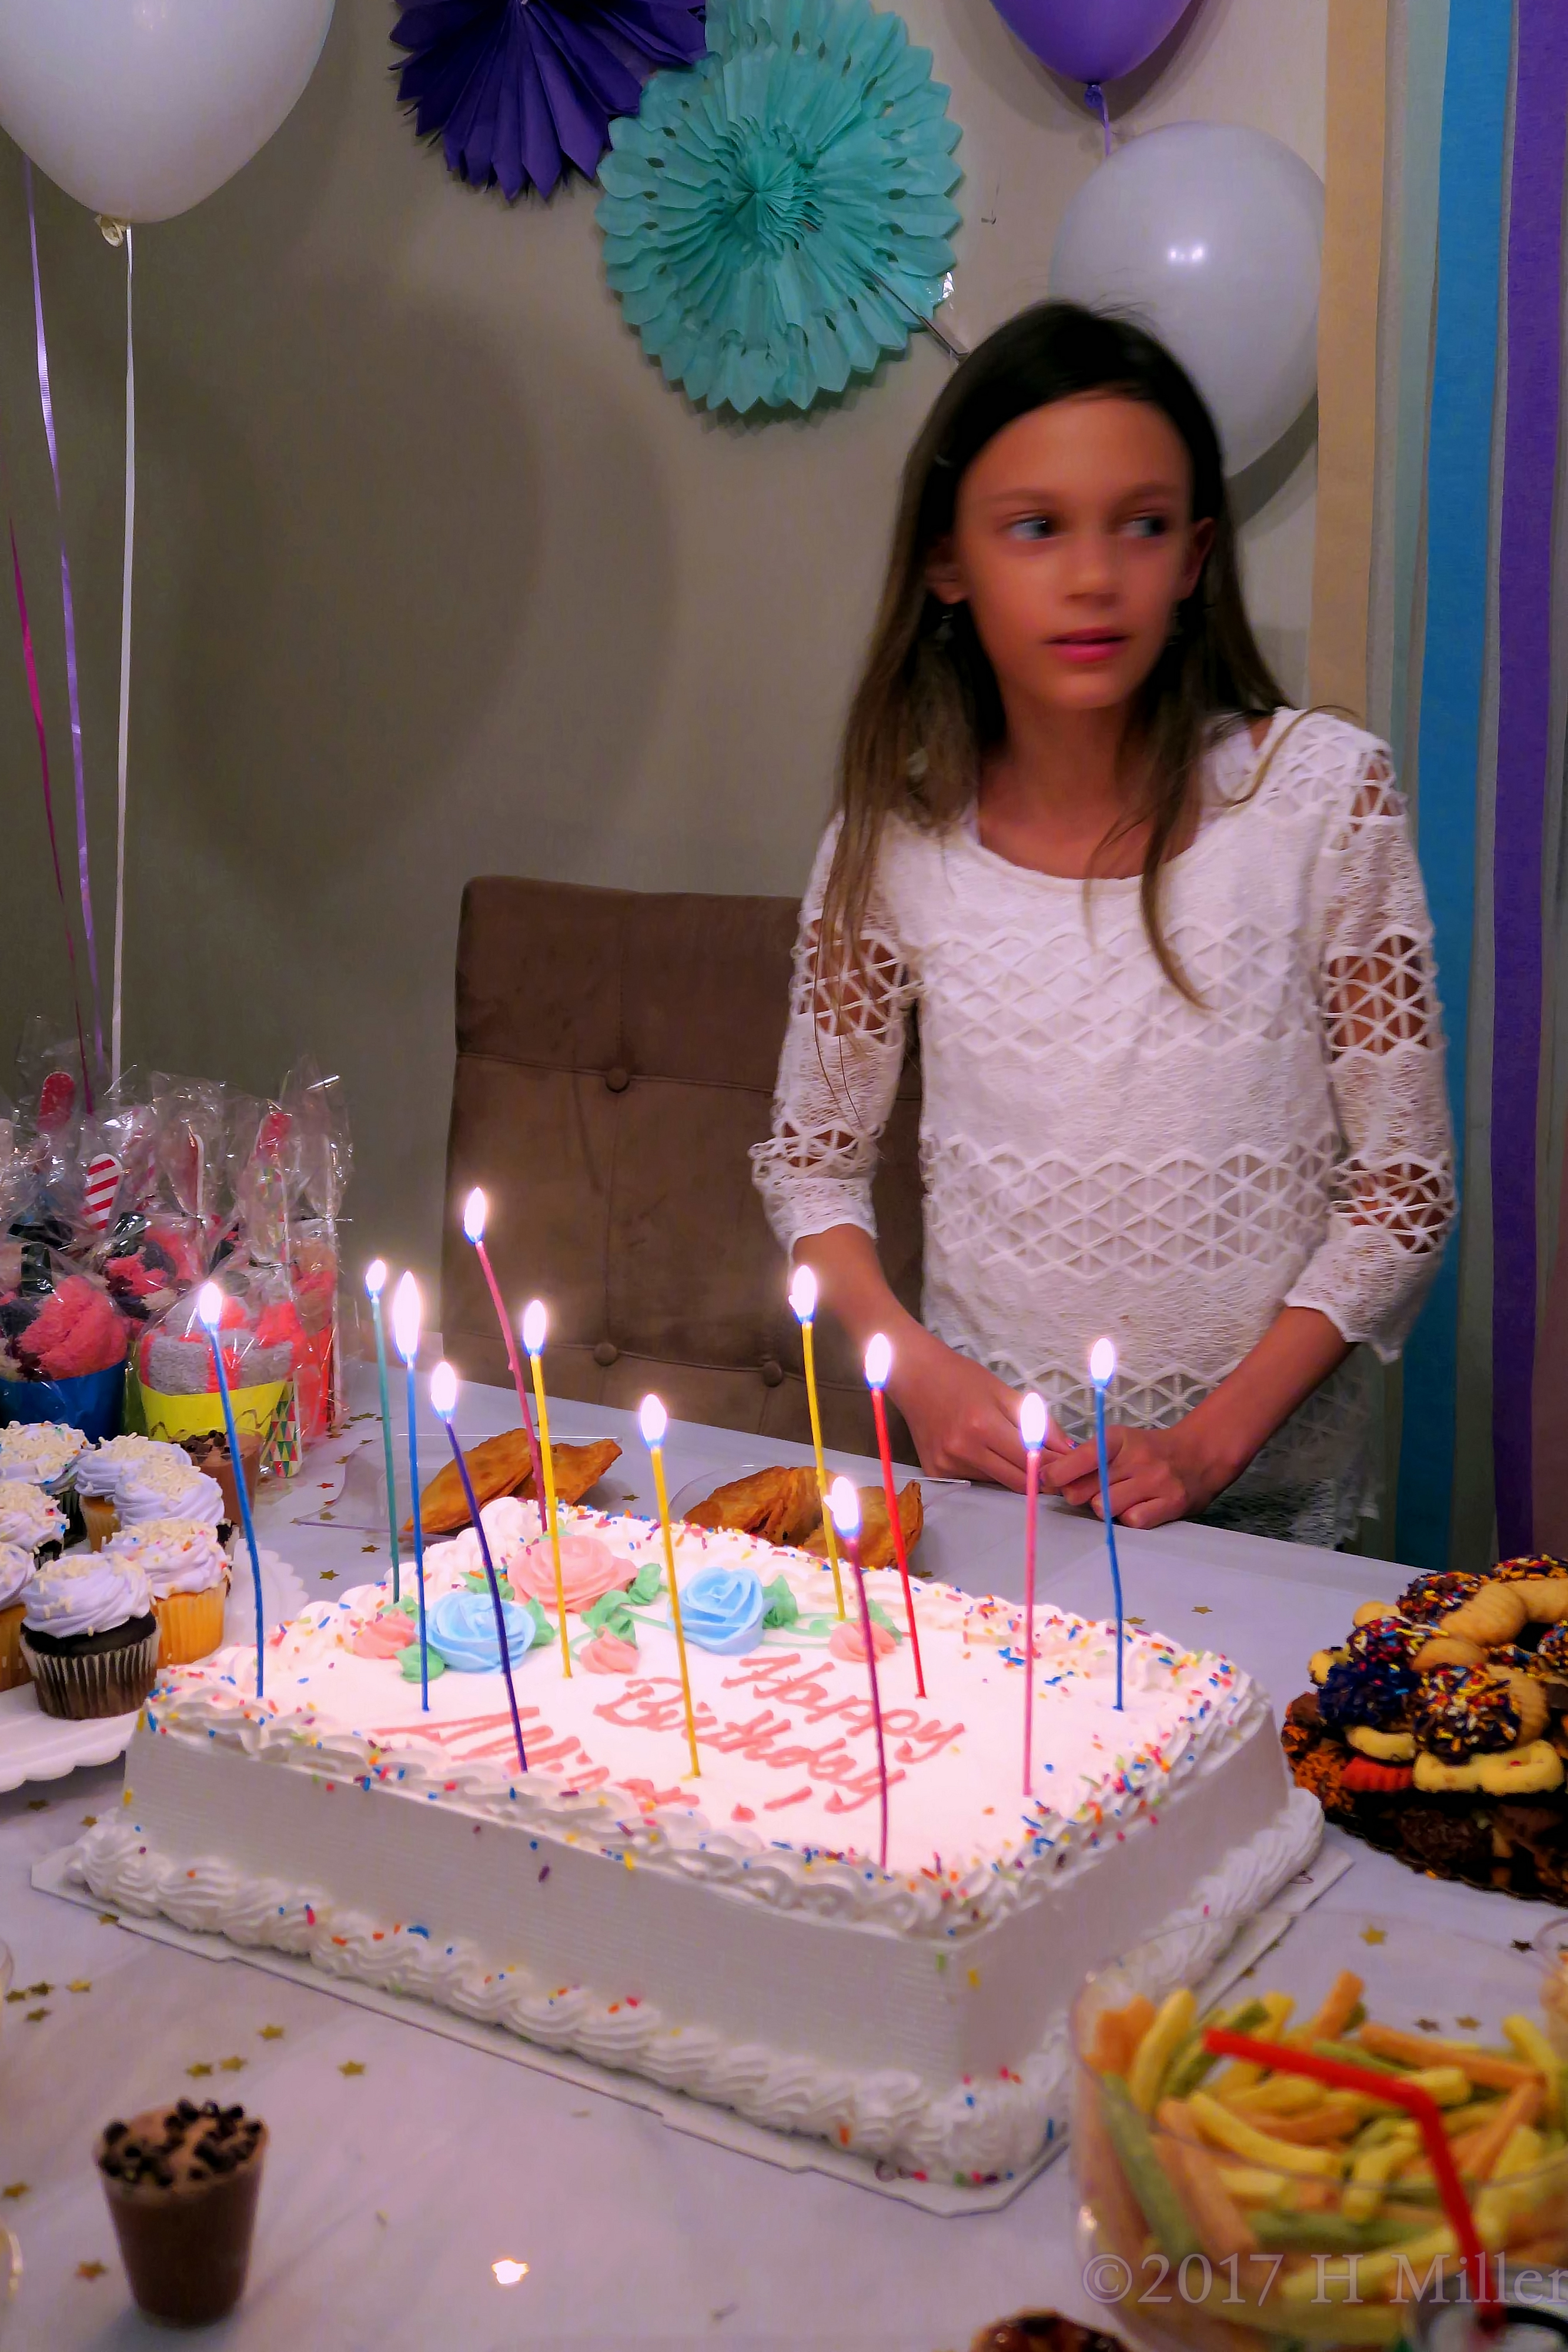 The Birthday Girl Waits Patiently For Cake. 